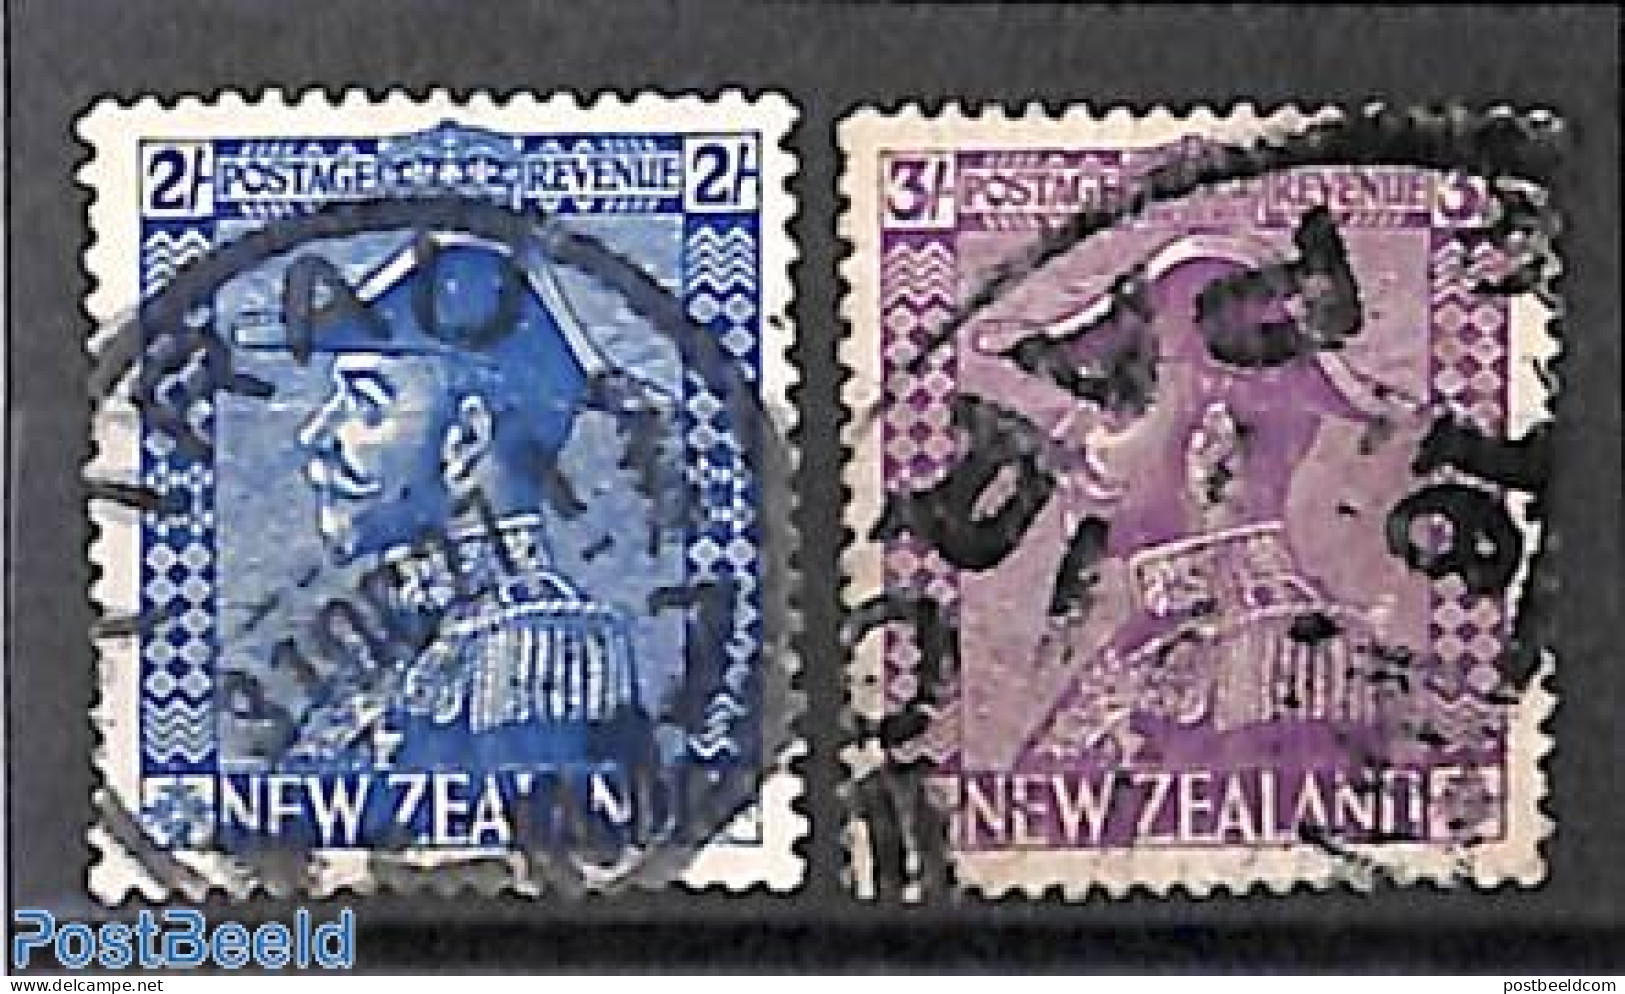 New Zealand 1926 Definitives 2v, Used, Used Or CTO - Used Stamps